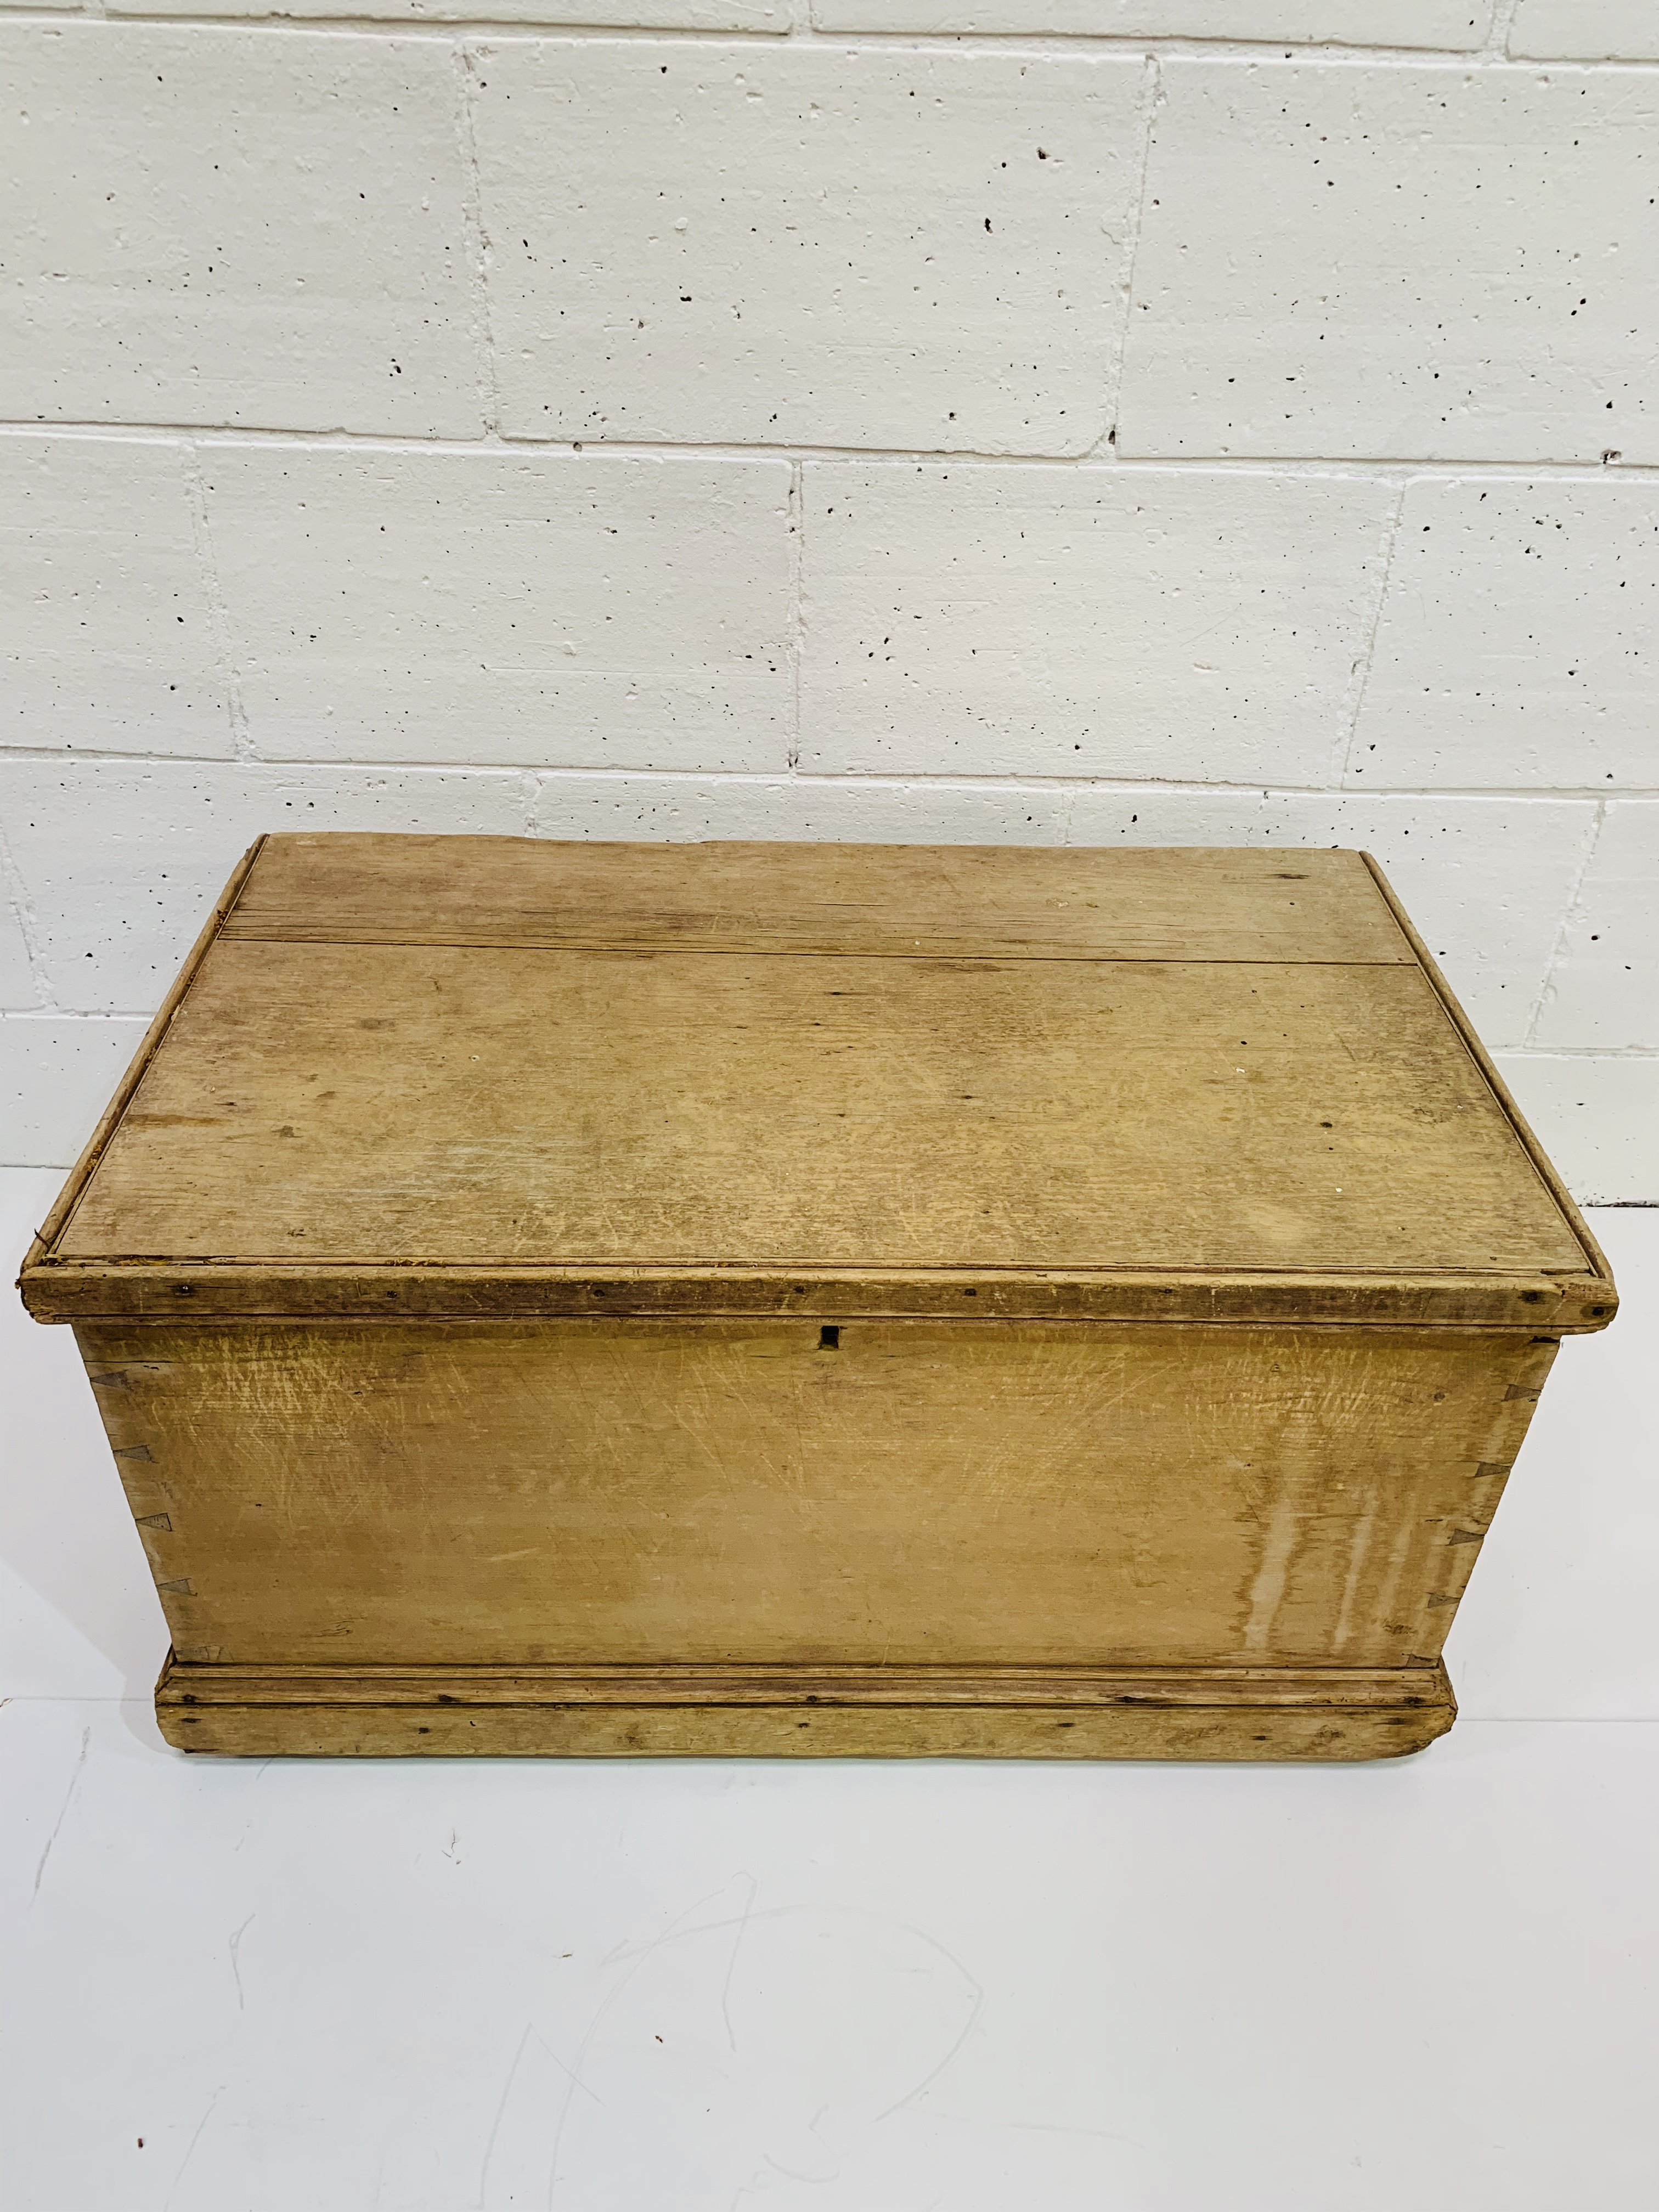 A pine chest with metal carry handles.